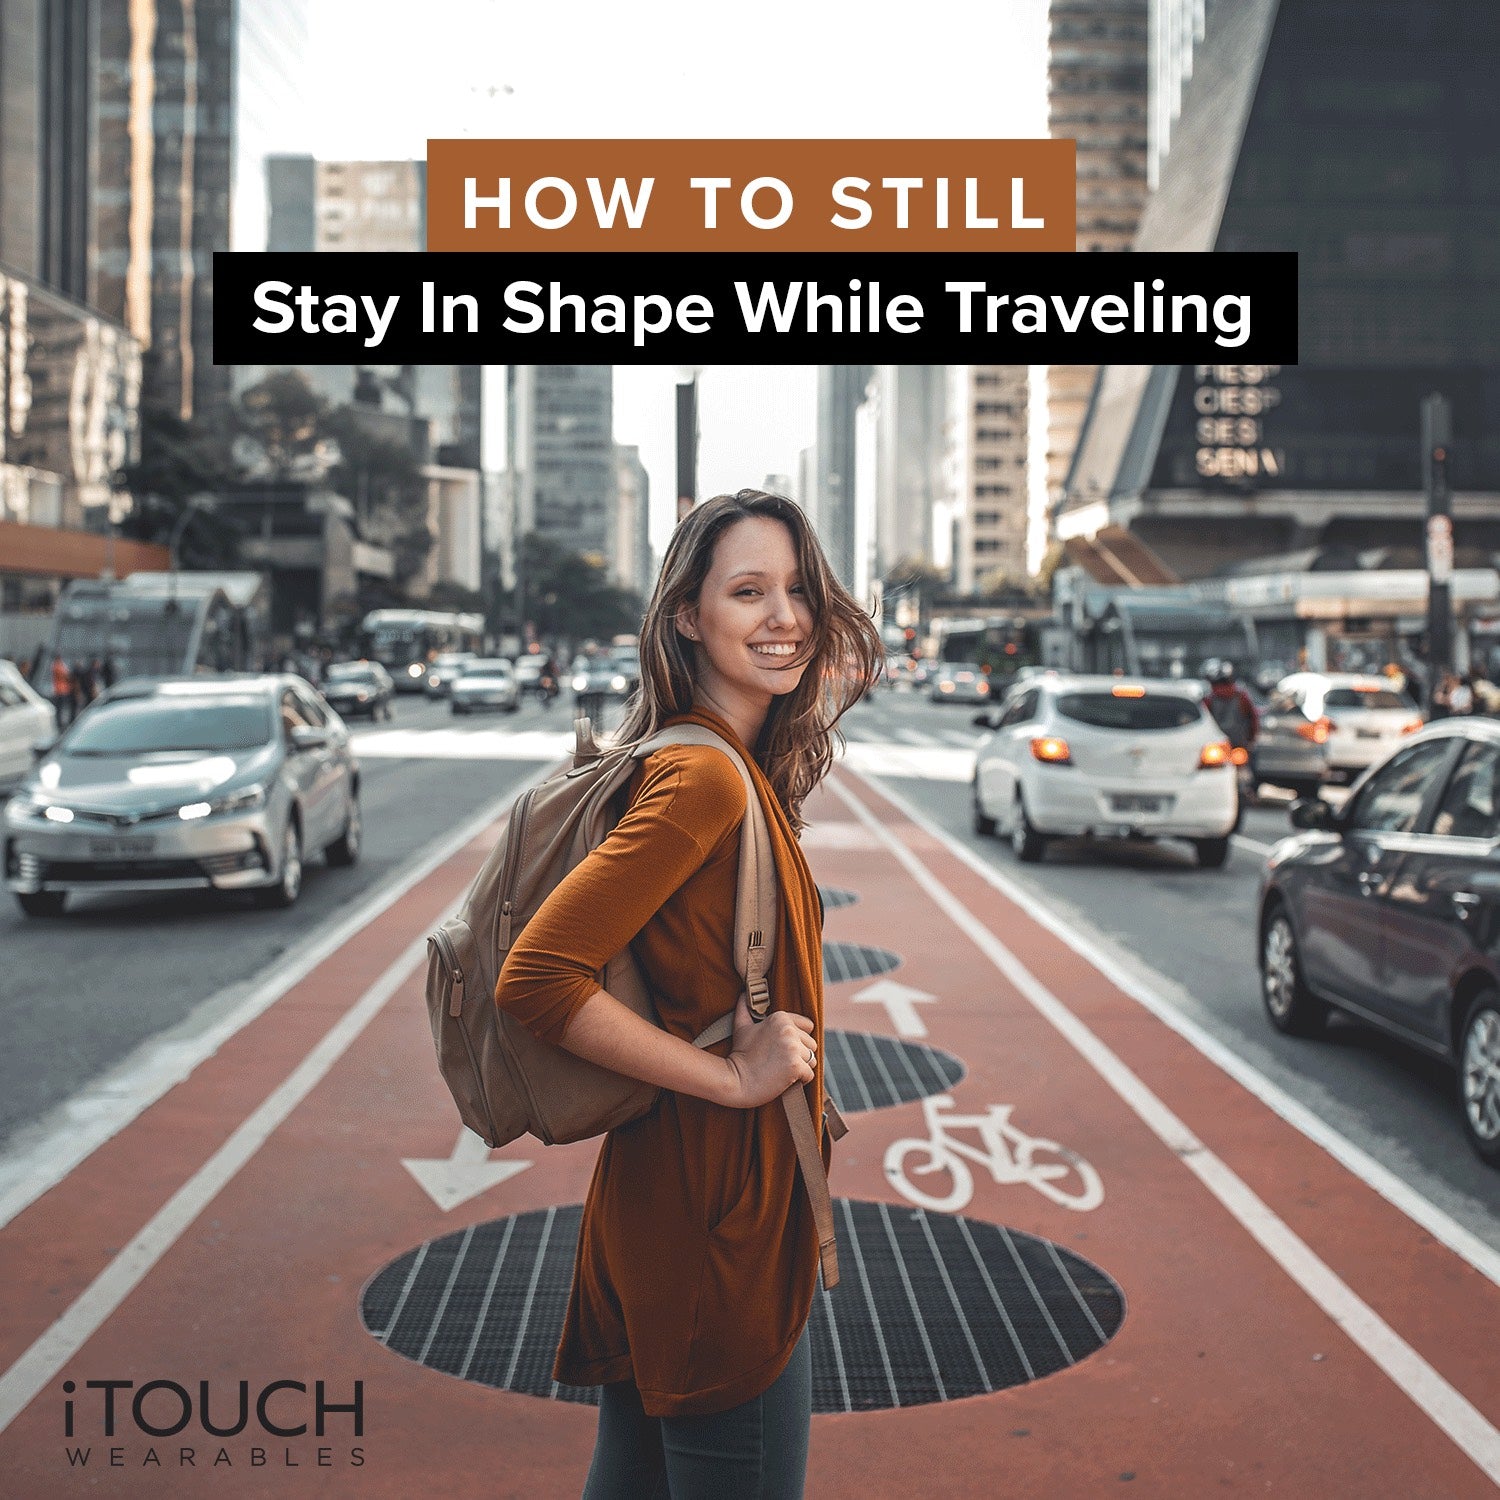 How To Still Stay In Shape While Traveling